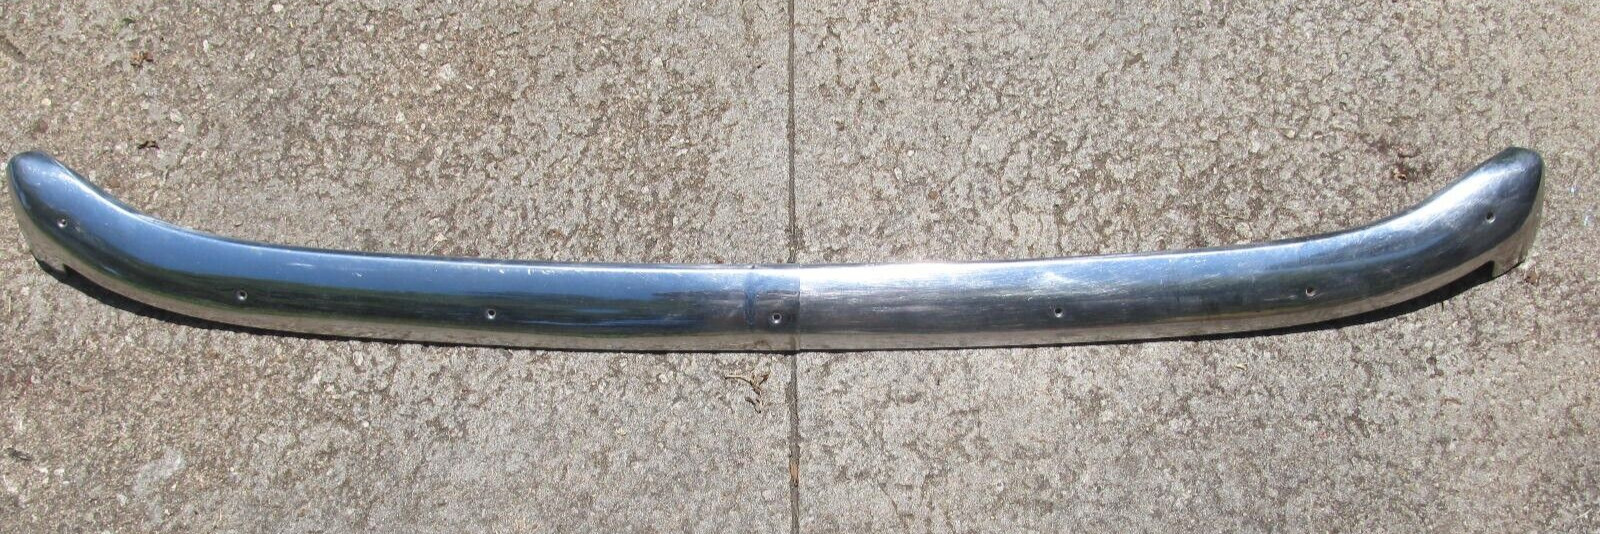 1968-1970 Plymouth Dodge Road runner GTX convertible header Windshield moulding